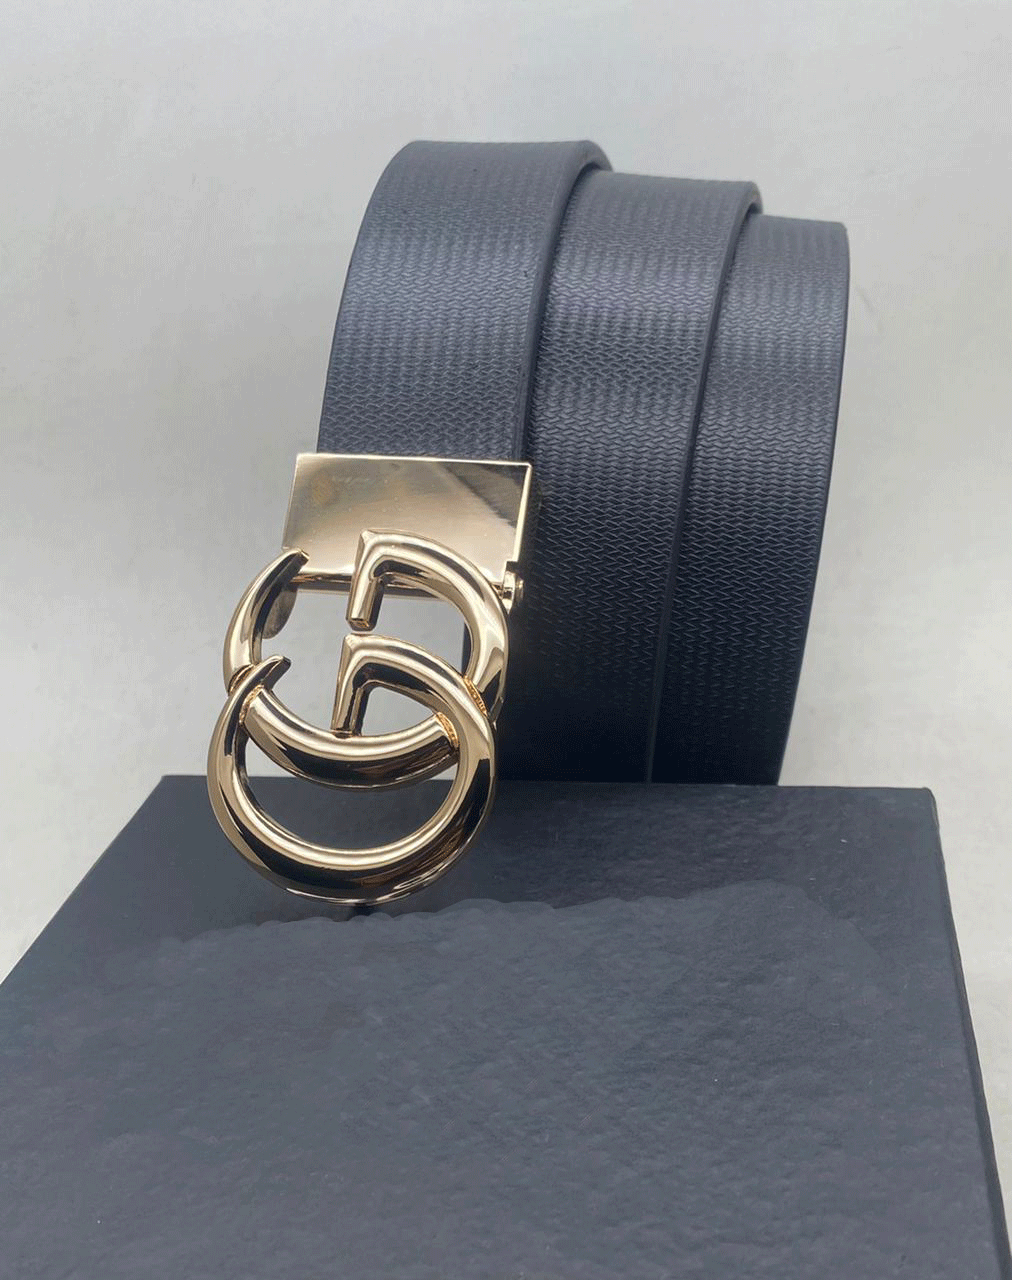 2022 Leather Top Quality Designers Belt-Unique and Classy